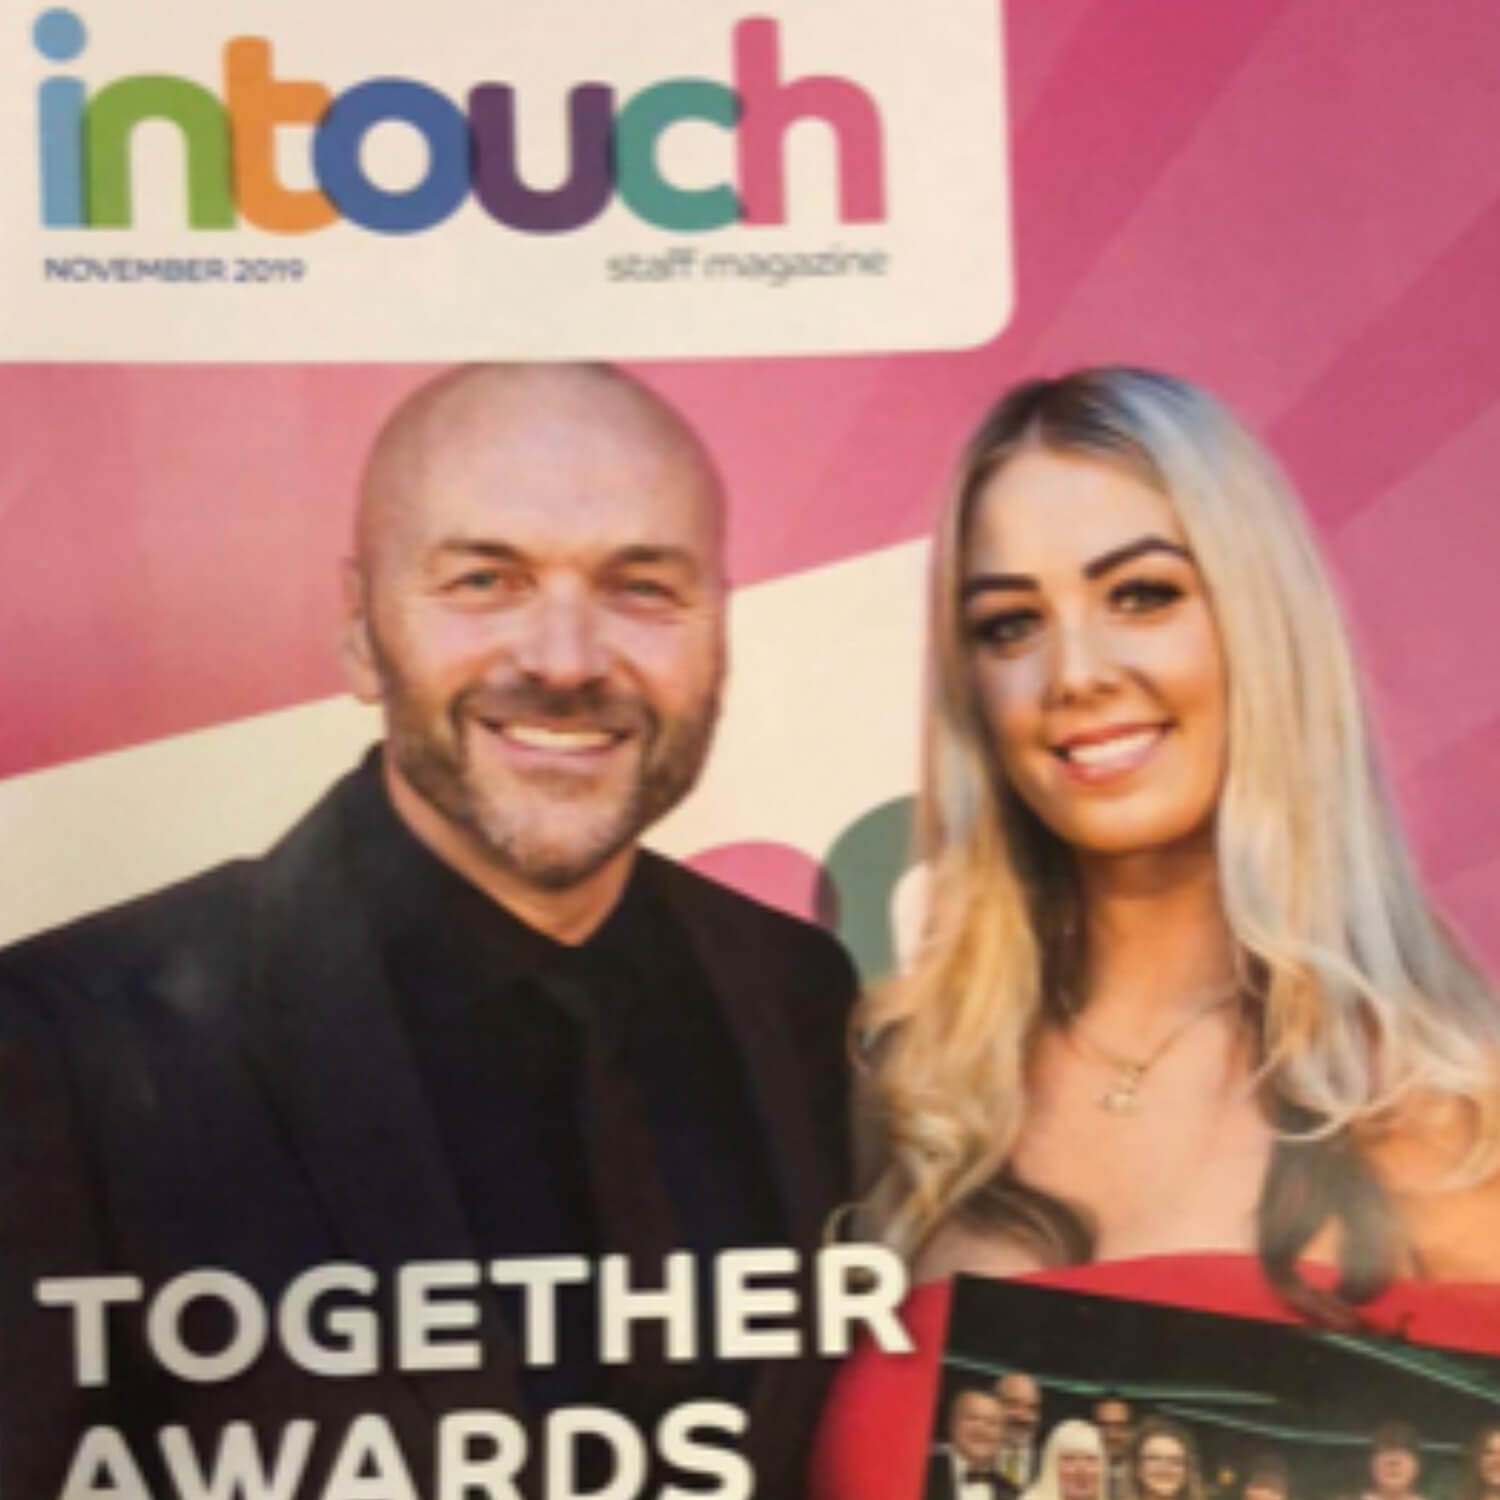 Wirral Met Case Study Paige Campbell standing next to Simon Rimmer at Wirral University Teaching Hospital Annual Staff Awards on the cover of Intouch Staff Magazine